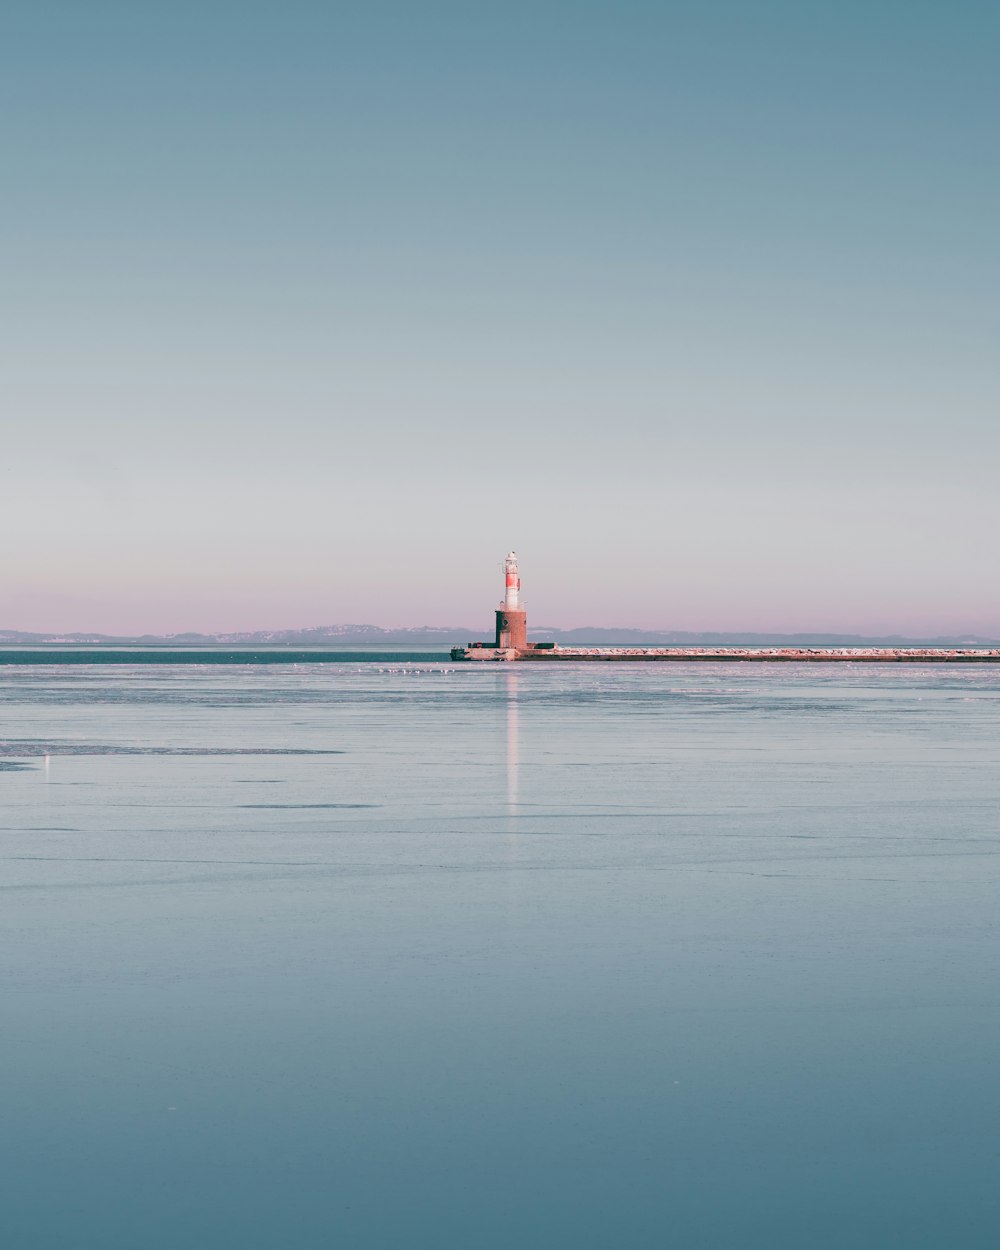 a light house sitting in the middle of a body of water